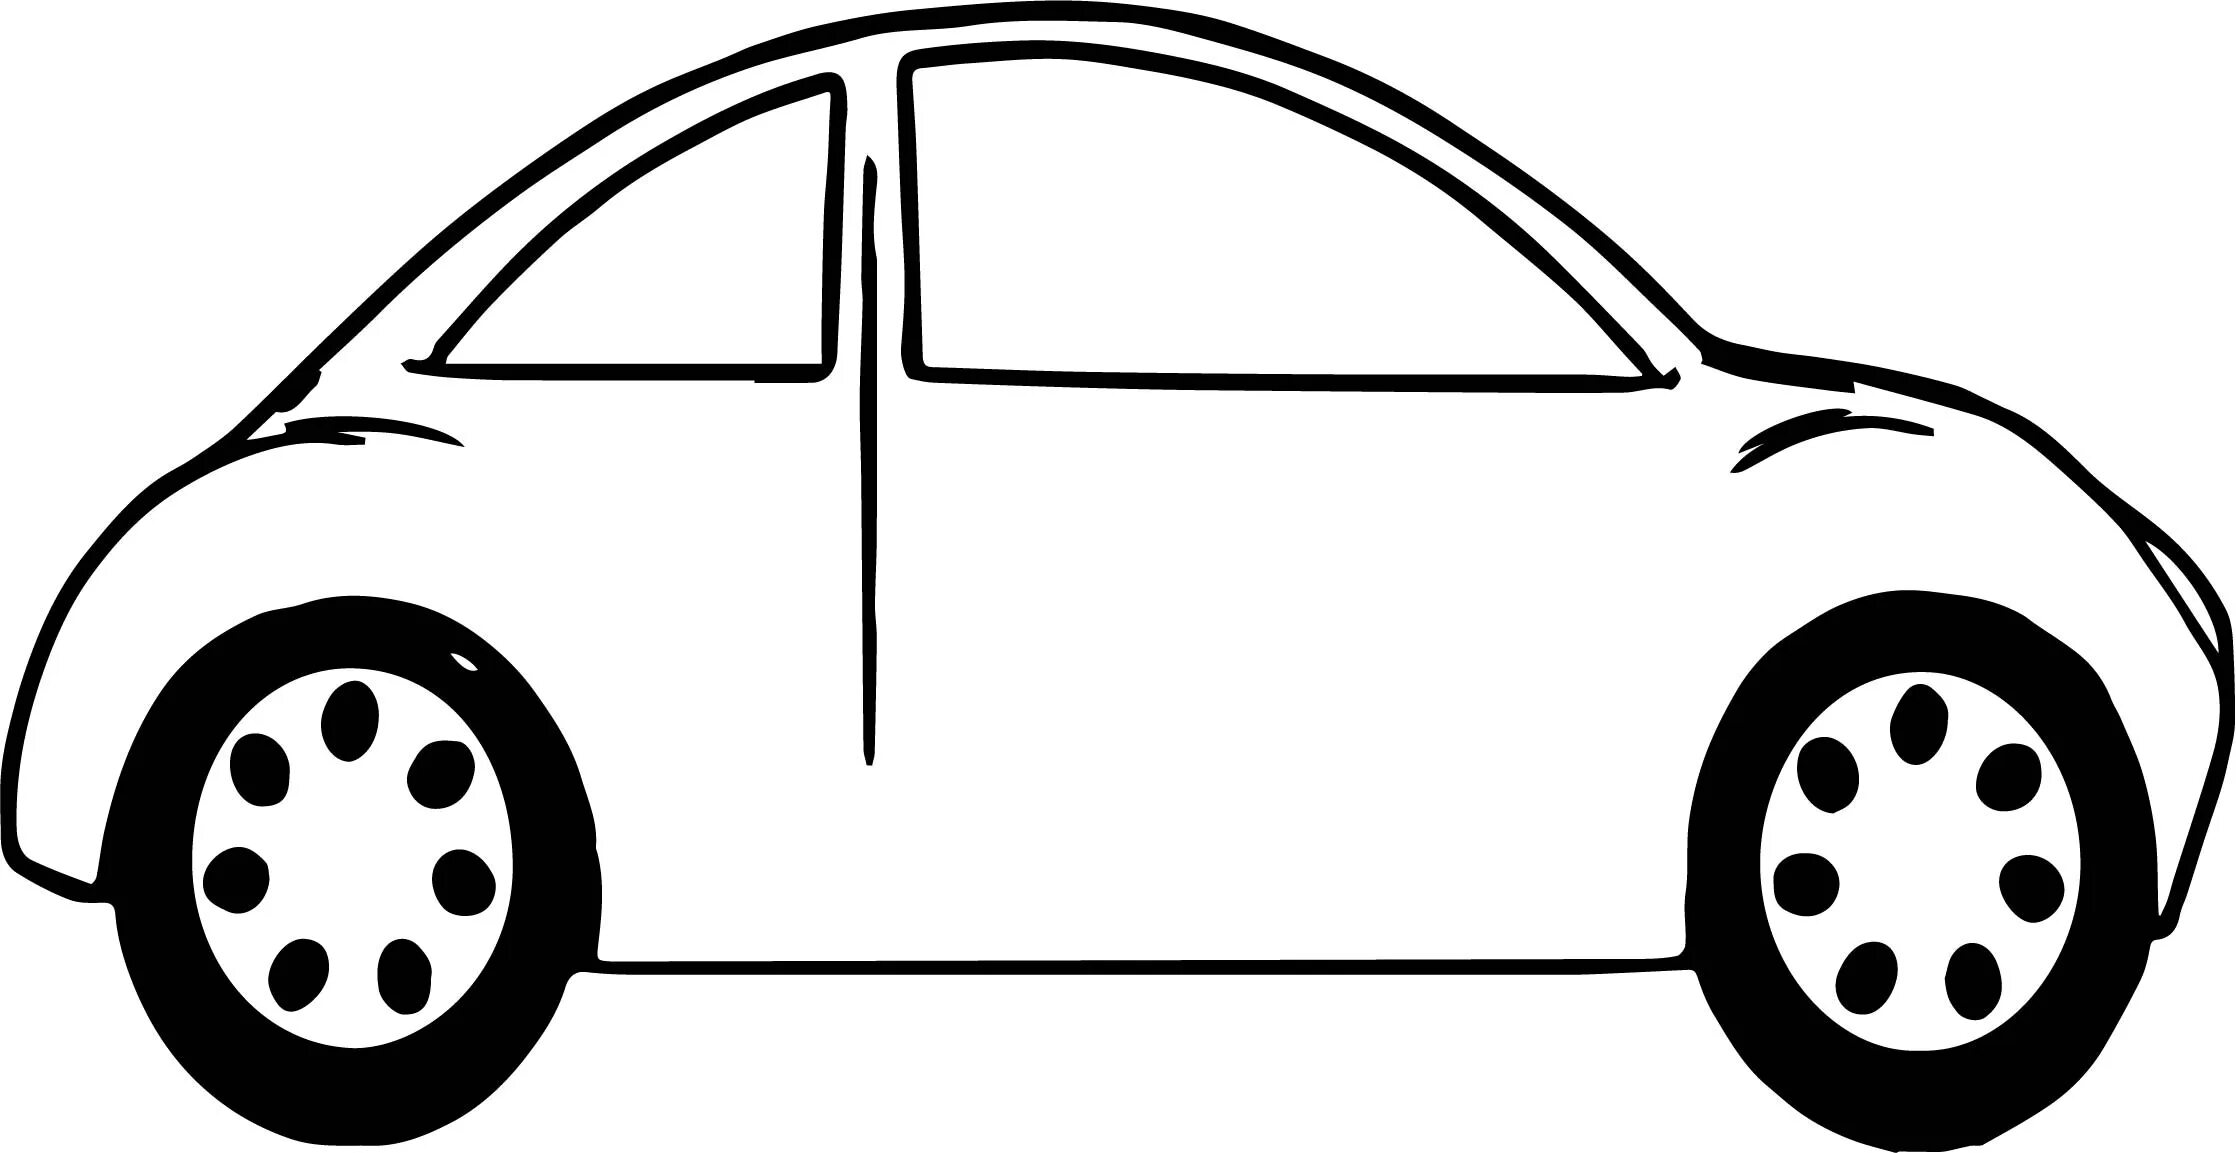 Adorable passenger car coloring pages for kids